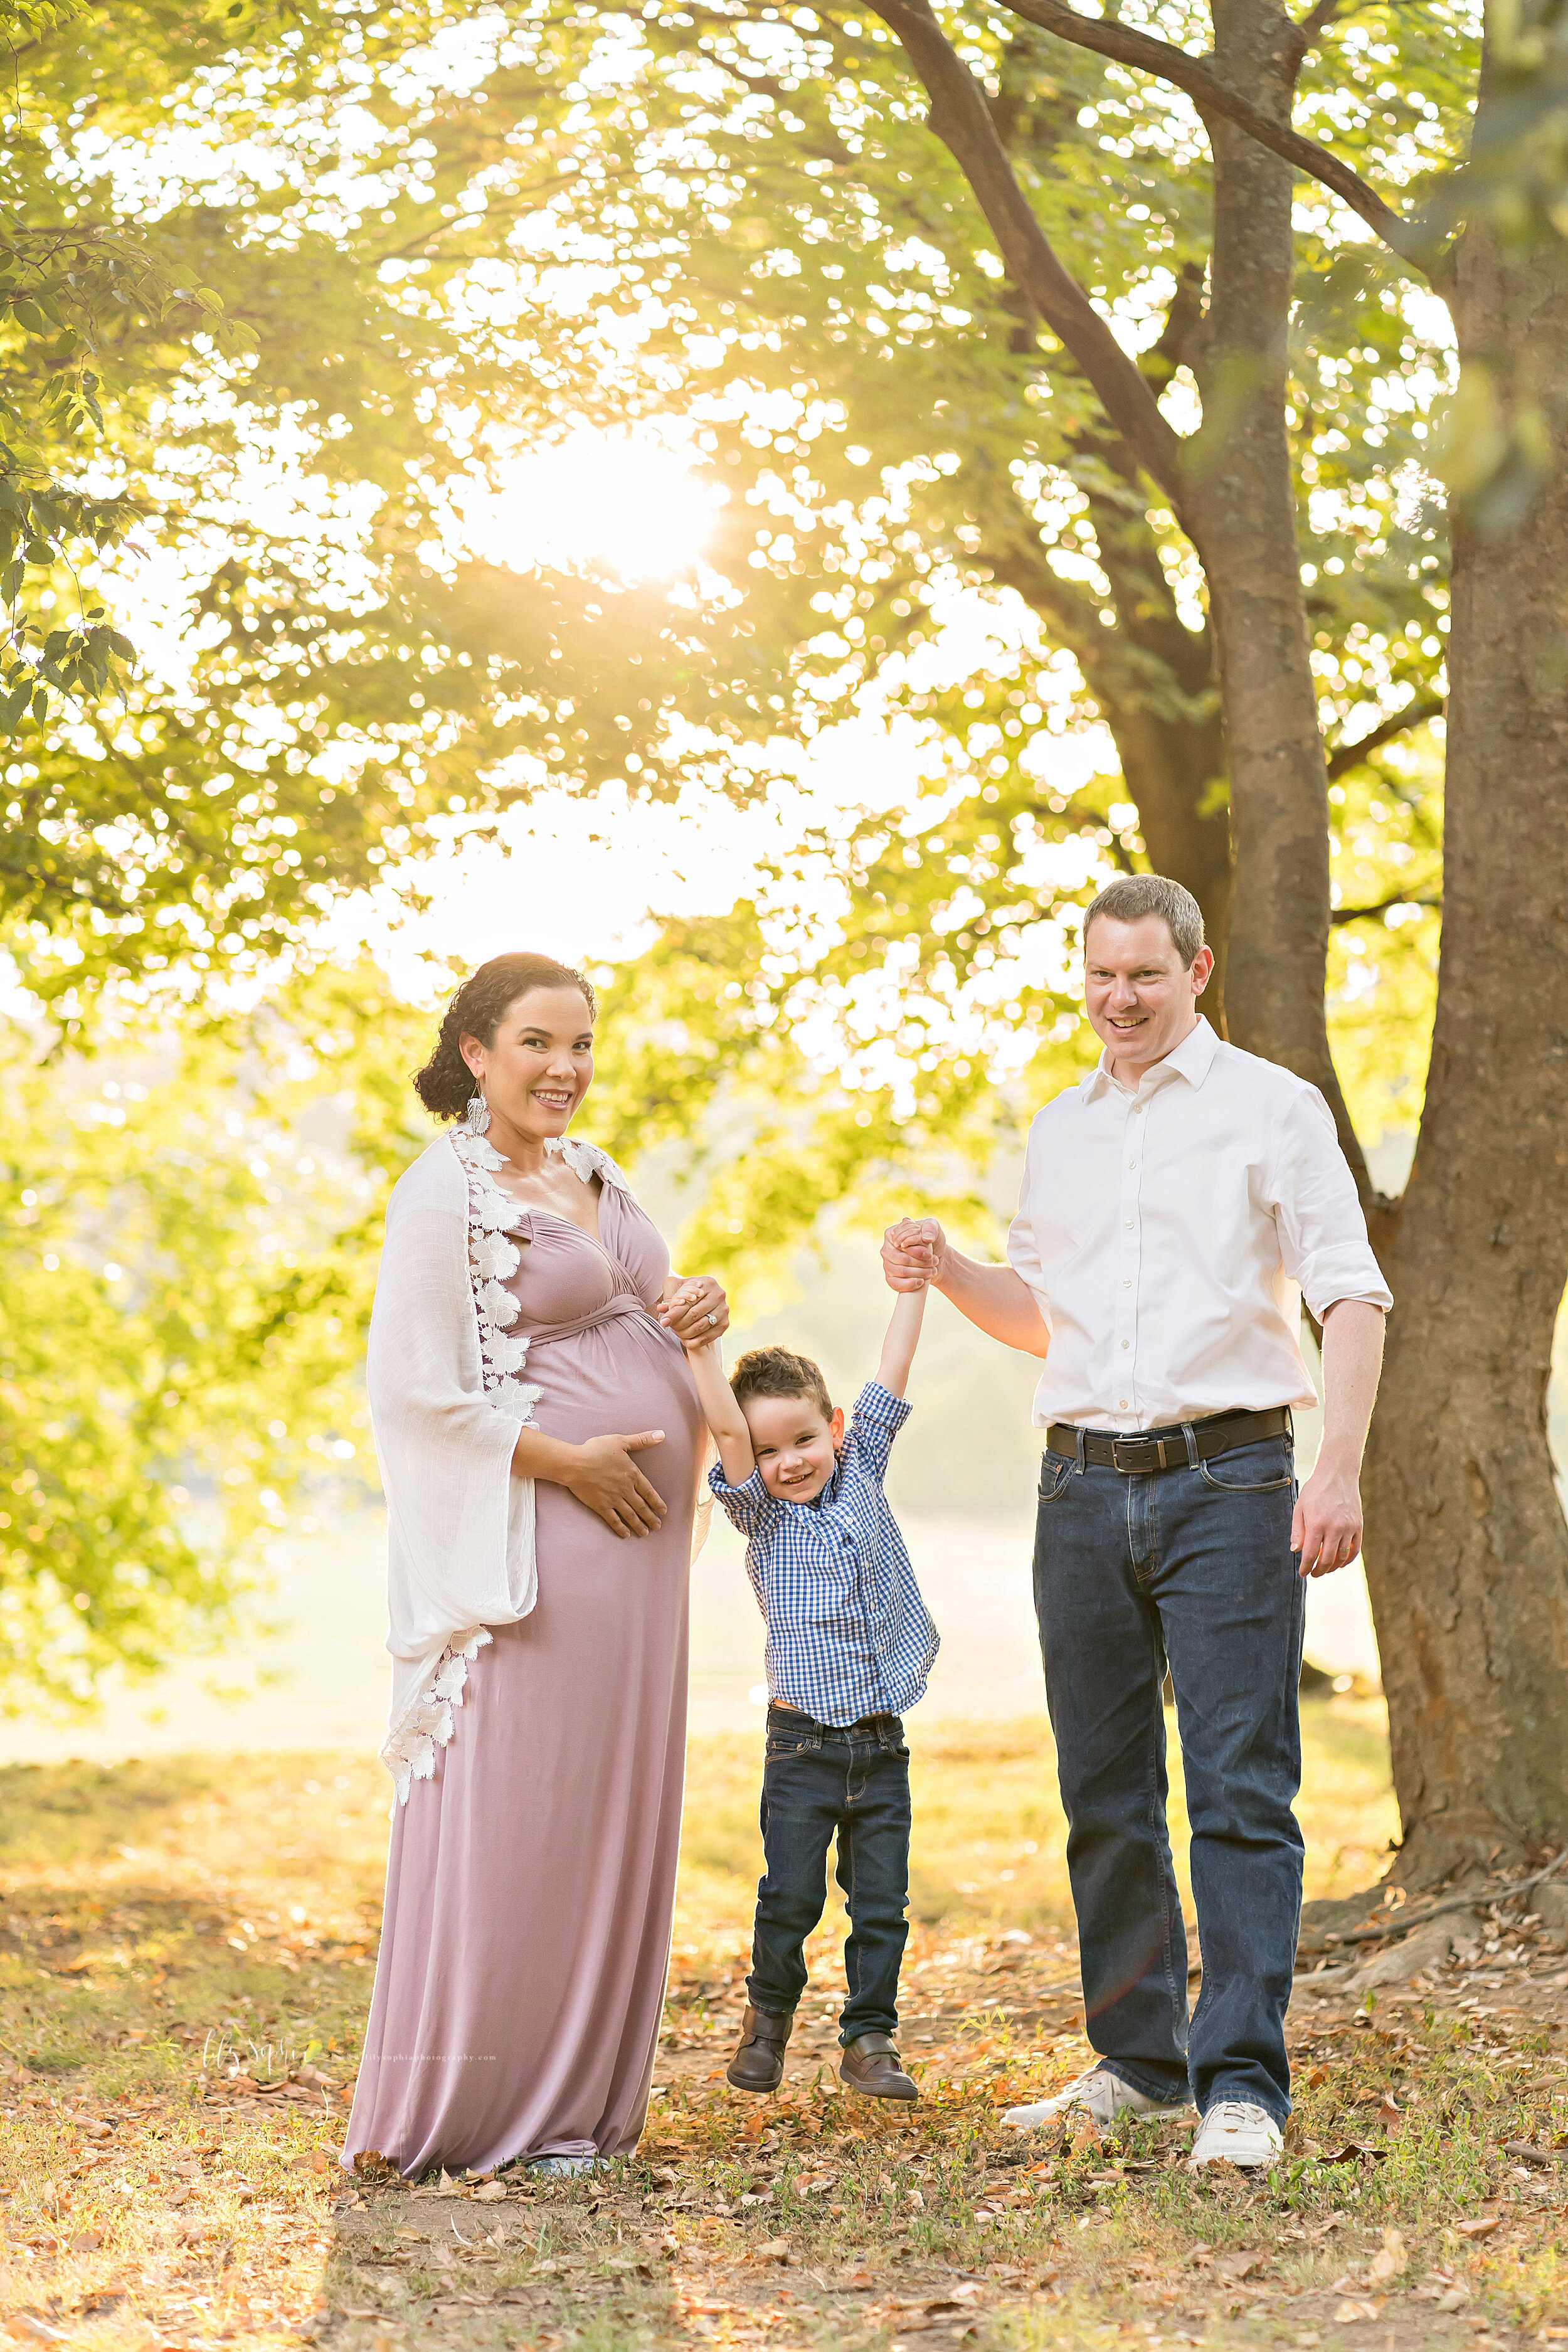 atlanta-decatur-old-fourth-ward-poncey-highlands-candler-park-grant-park-brookhaven-buckhead-virginia-highlands-west-end-decatur-lily-sophia-photography-family-maternity-park-session_2405.jpg